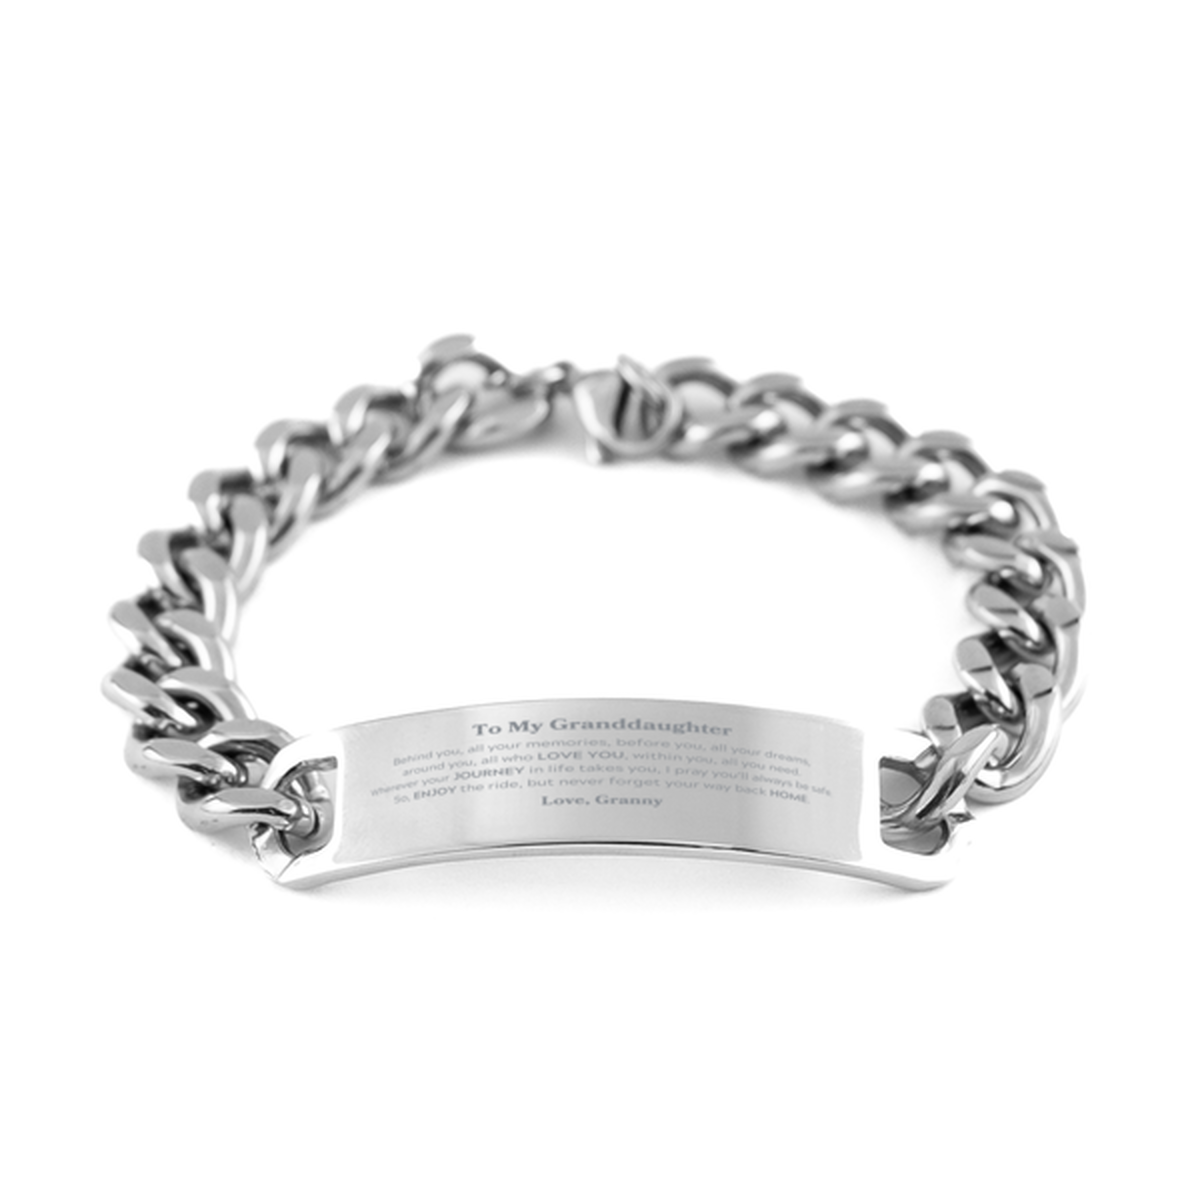 To My Granddaughter Graduation Gifts from Granny, Granddaughter Cuban Chain Stainless Steel Bracelet Christmas Birthday Gifts for Granddaughter Behind you, all your memories, before you, all your dreams. Love, Granny